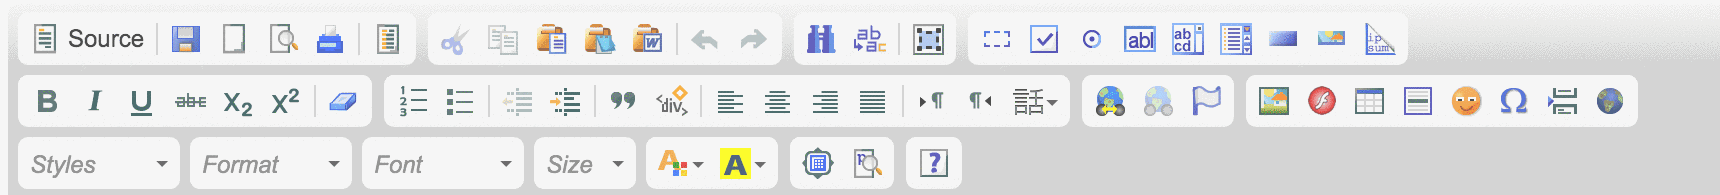 Differences between Lo- and HiDPI icons.